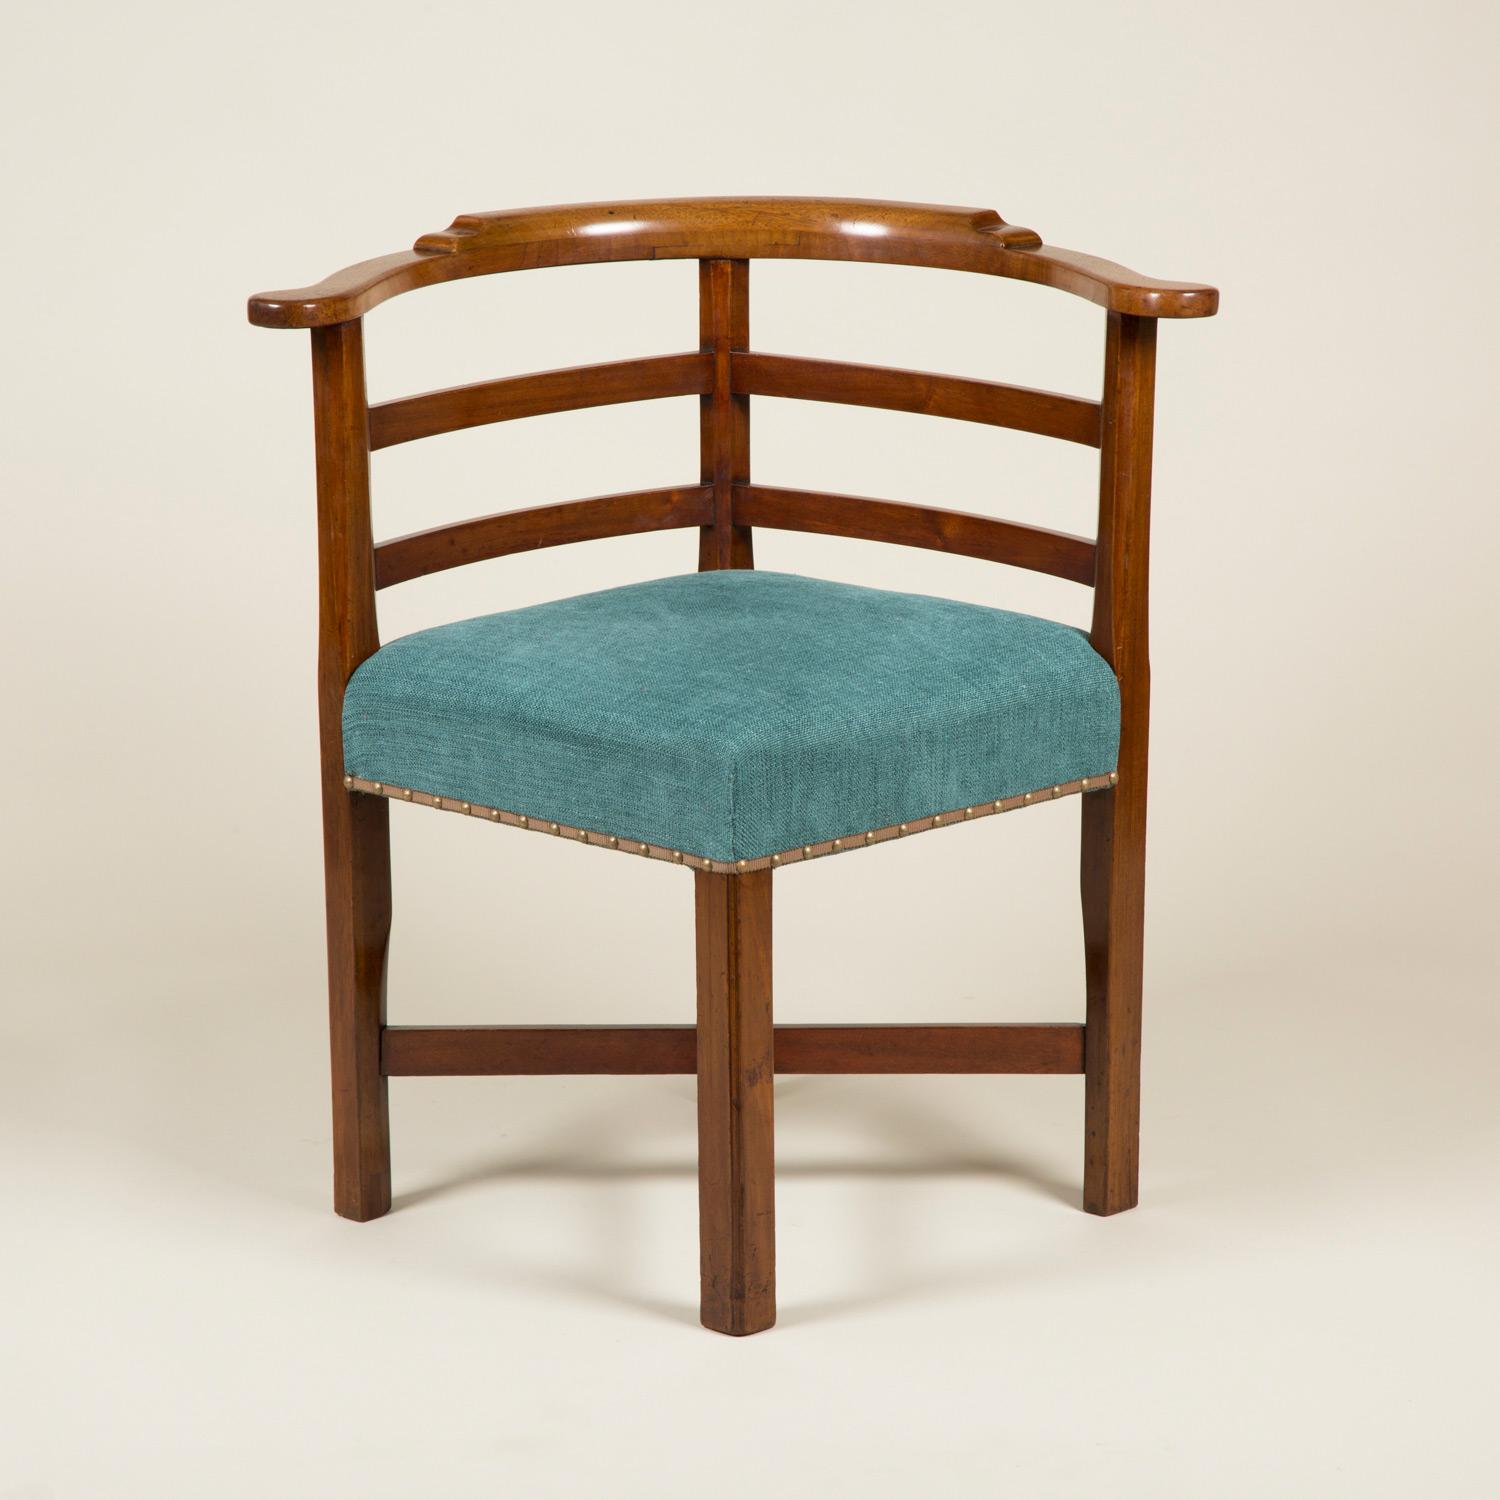 Early 19th Century Walnut Corner Chair with Simple Horizontal Back-Splats For Sale 2